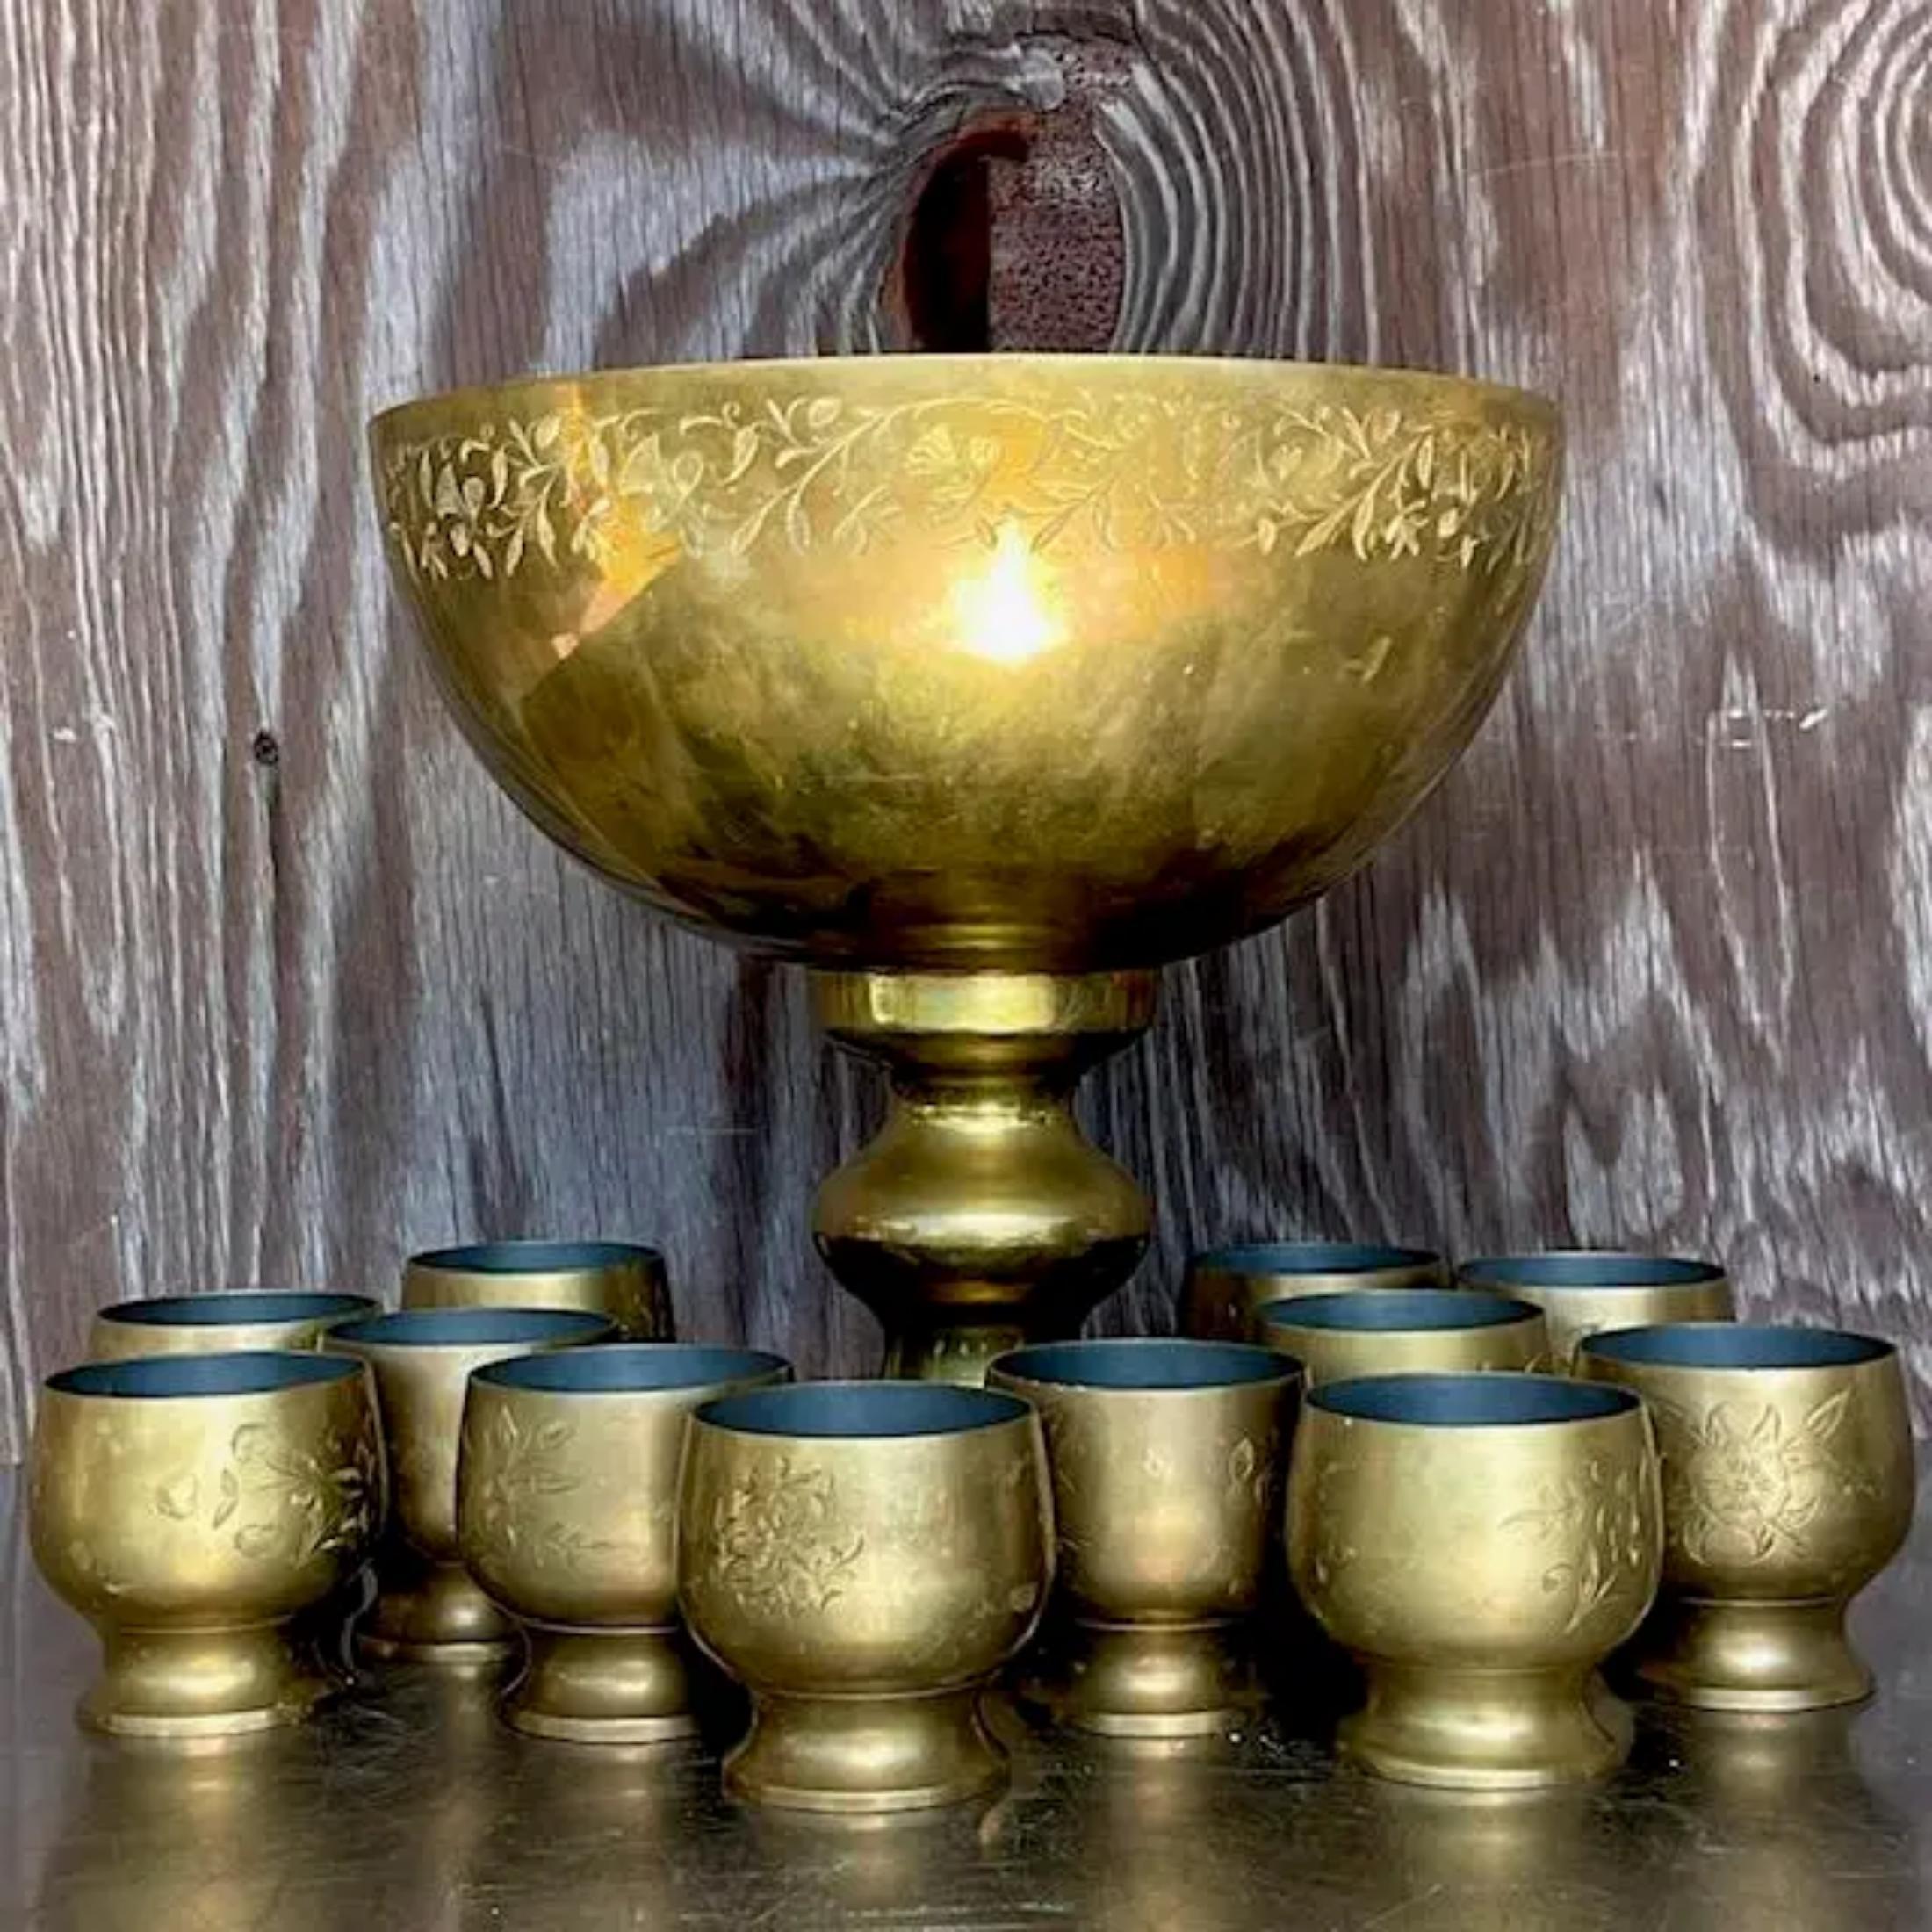 A stunning vintage Boho punch bowl set. A gorgeous etched brass finish with a tin interior. 12 individual serving cups. The bowl would also be gorgeous on a center table filled with orchids. Acquired from a Palm Beach estate.